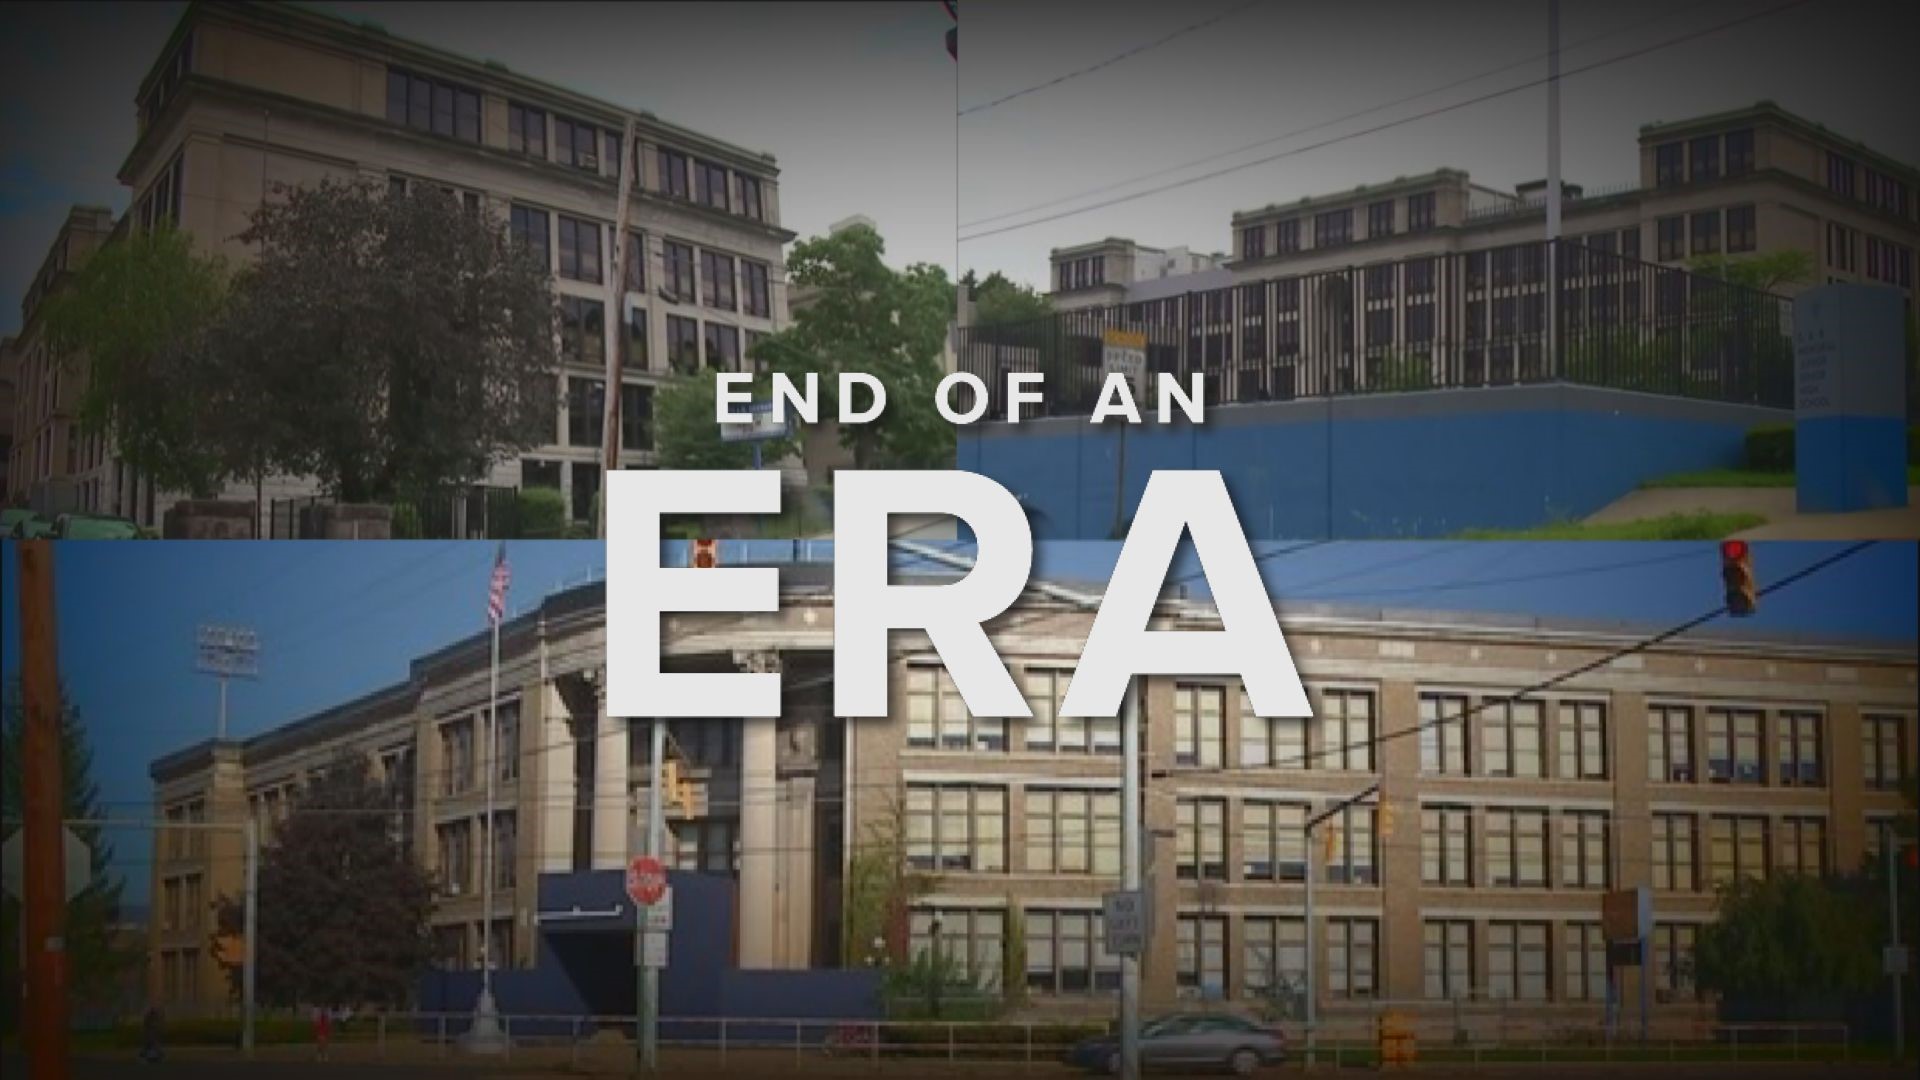 It's an end to an era as the three high schools in Luzerne County will combine into one in the fall.